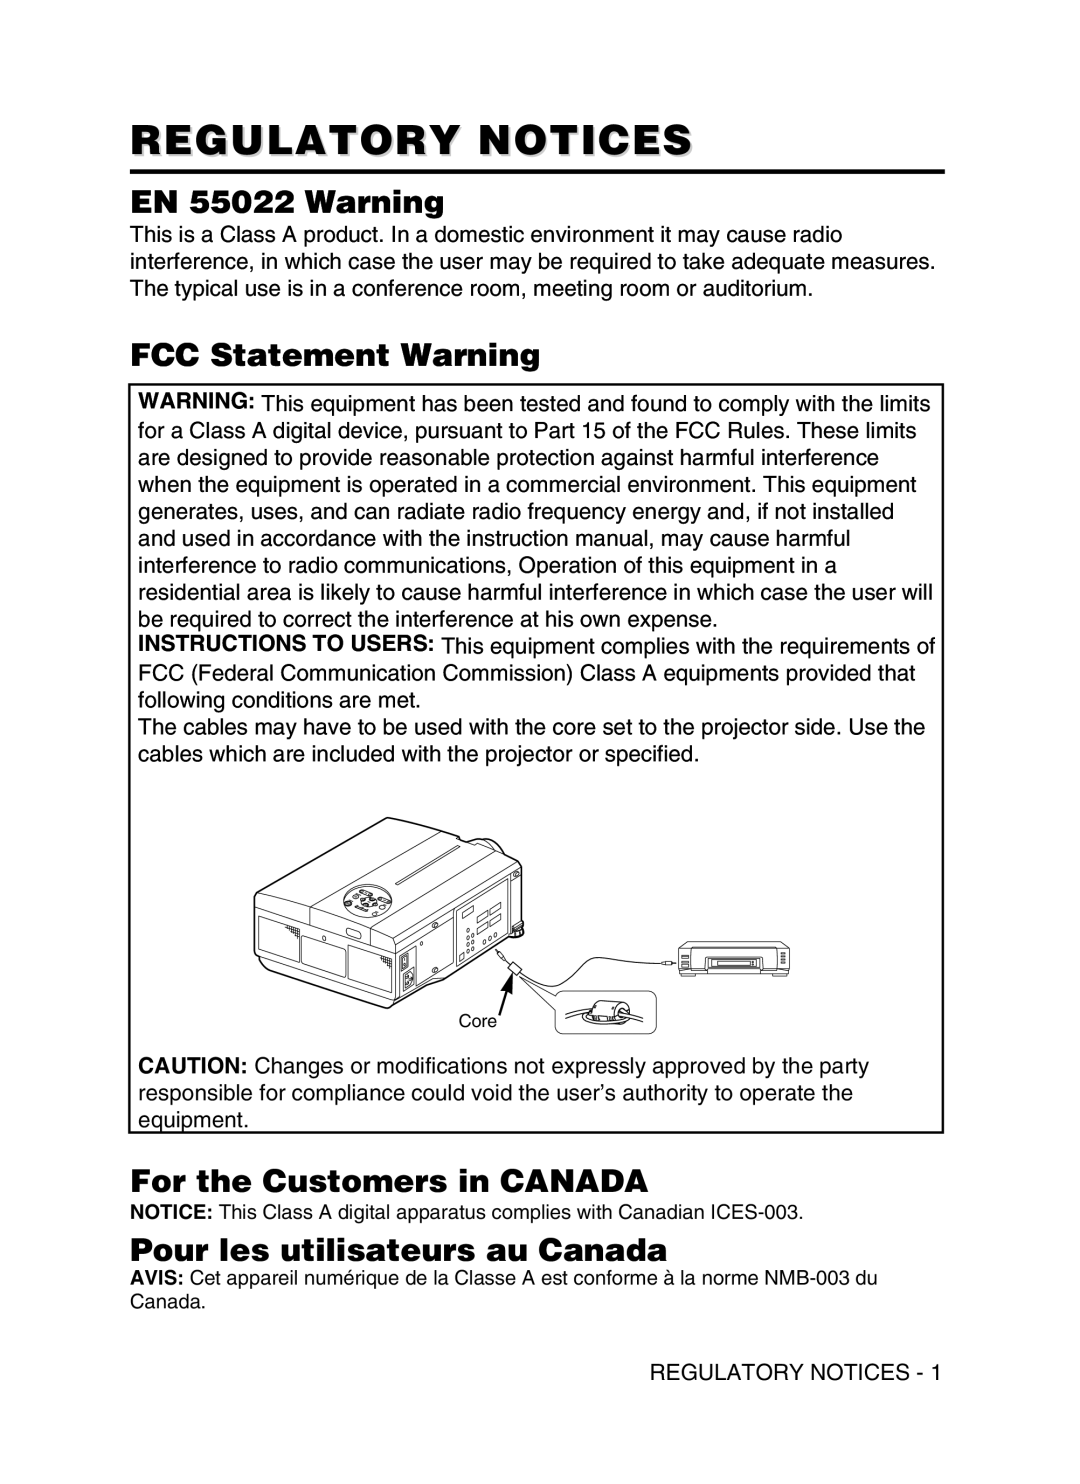 Proxima ASA DP6870 manual Regulatory Notices, EN 55022 Warning, FCC Statement Warning, For the Customers in CANADA 